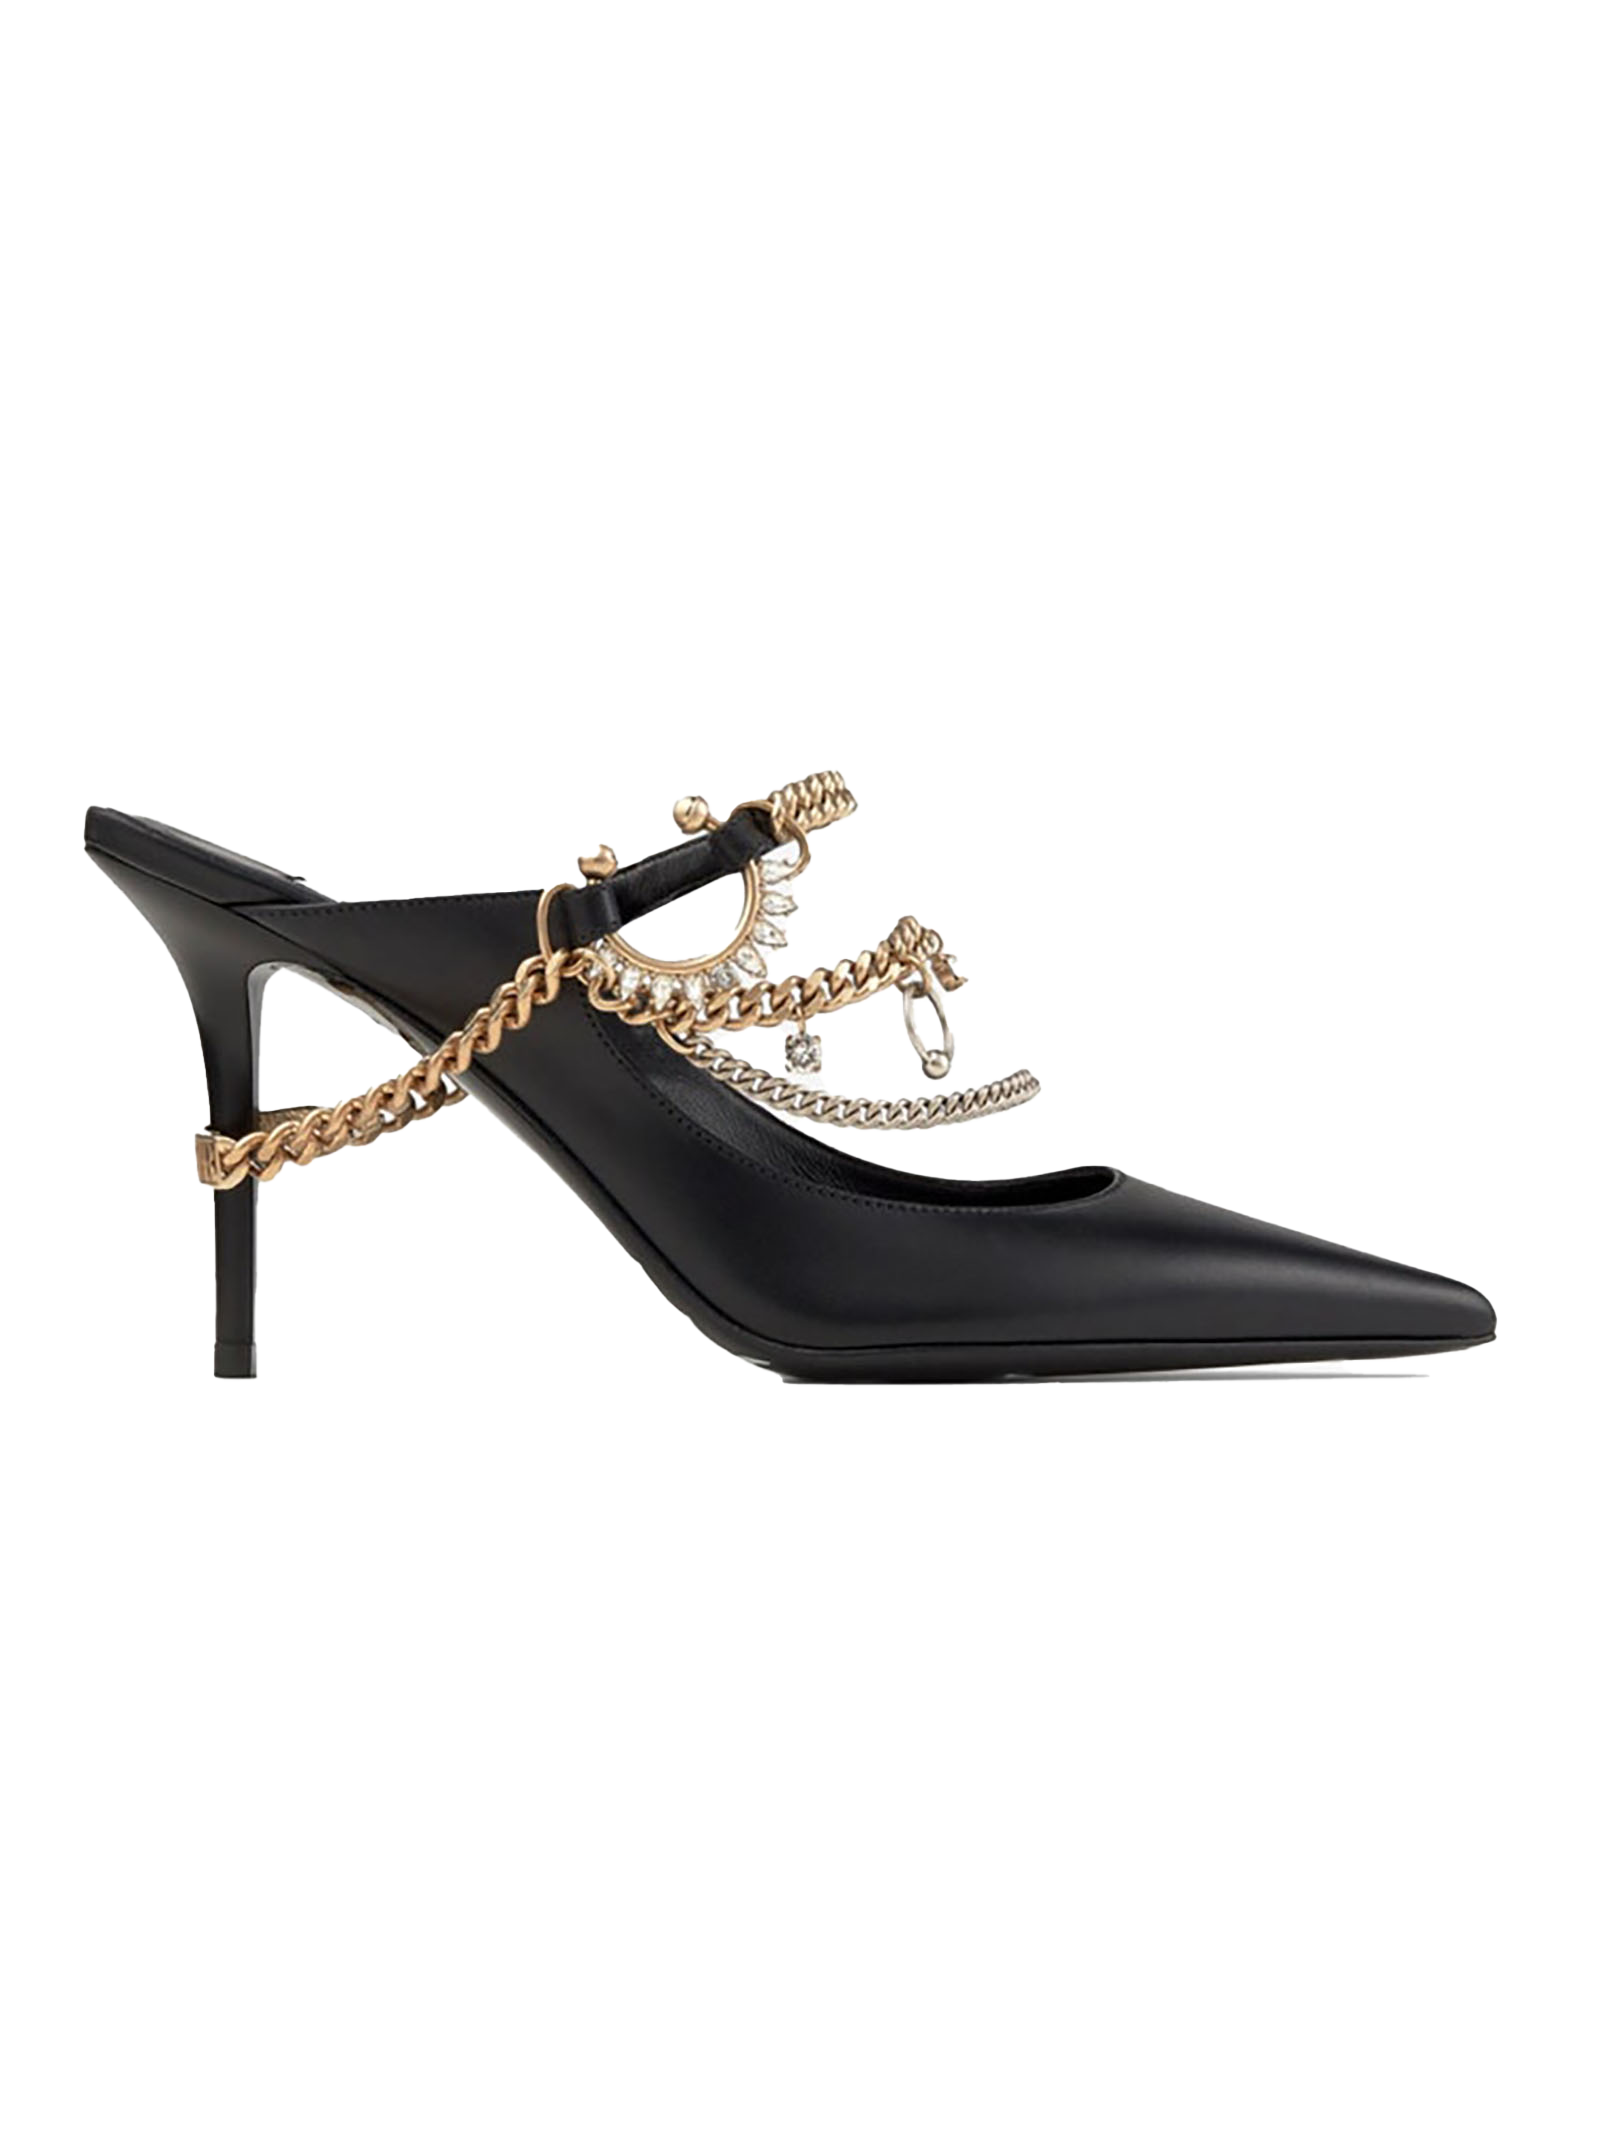 JIMMY CHOO X JEAN PAUL GAULTIER Black Calf Leather Mules With Jewellery